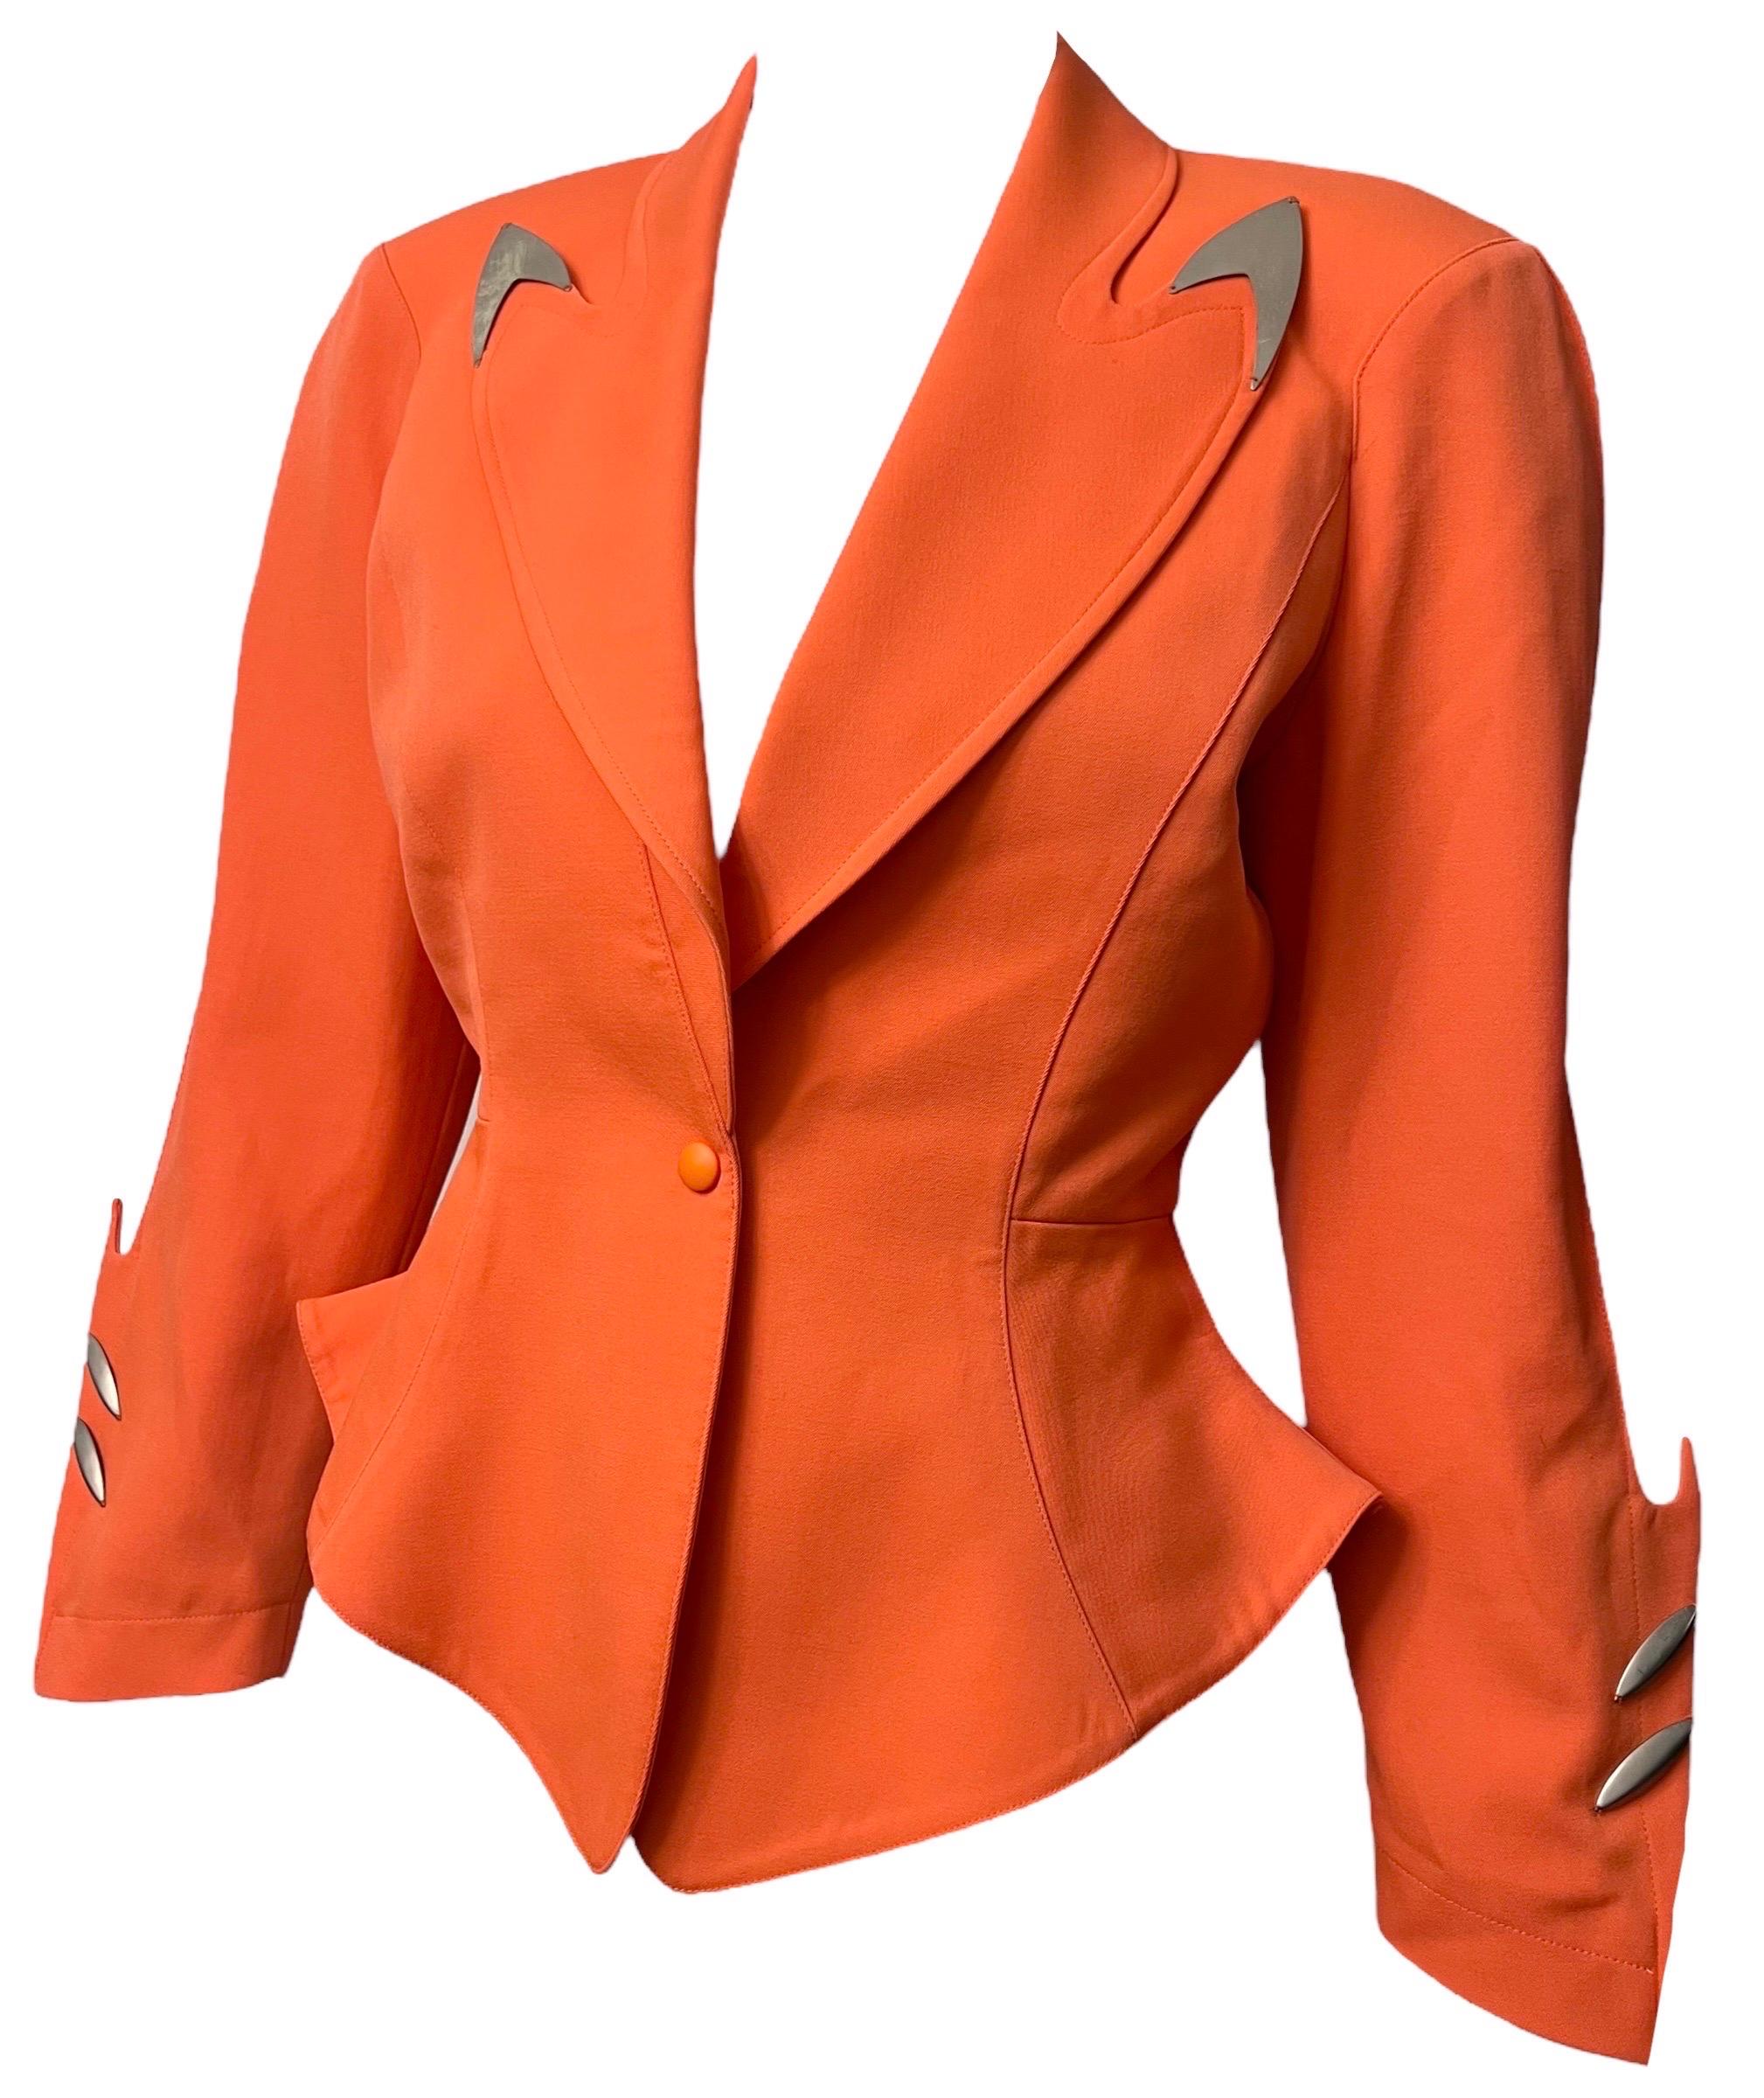 F/W 1989 Thierry Mugler Orange Futuristic Bullet Metal Jacket In Good Condition For Sale In Concord, NC